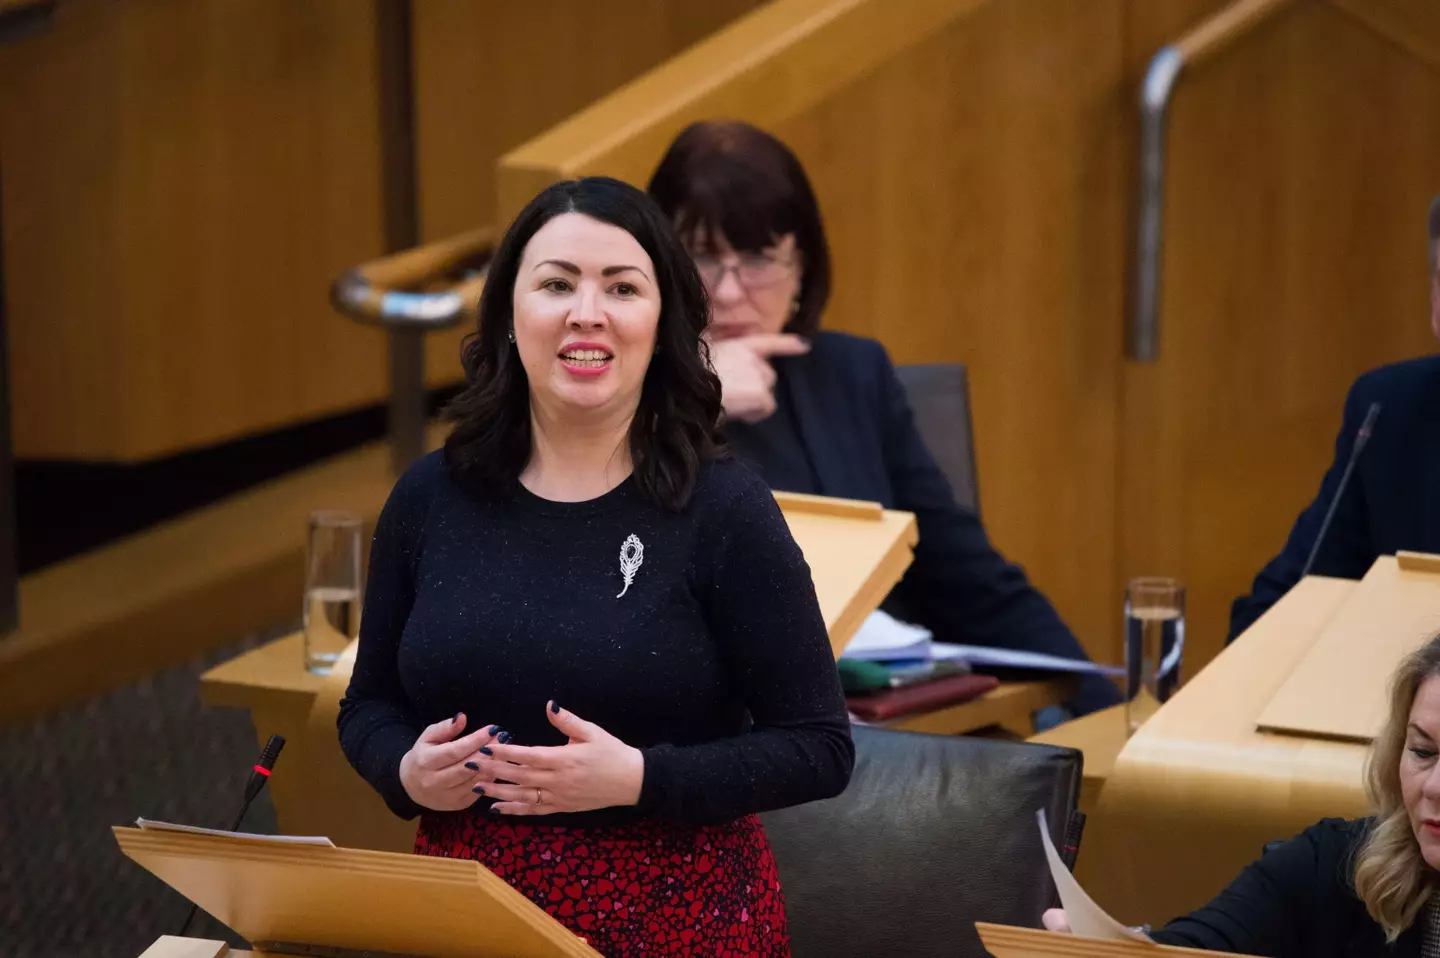 The new law was first proposed by Labour MSP Monica Lennon.